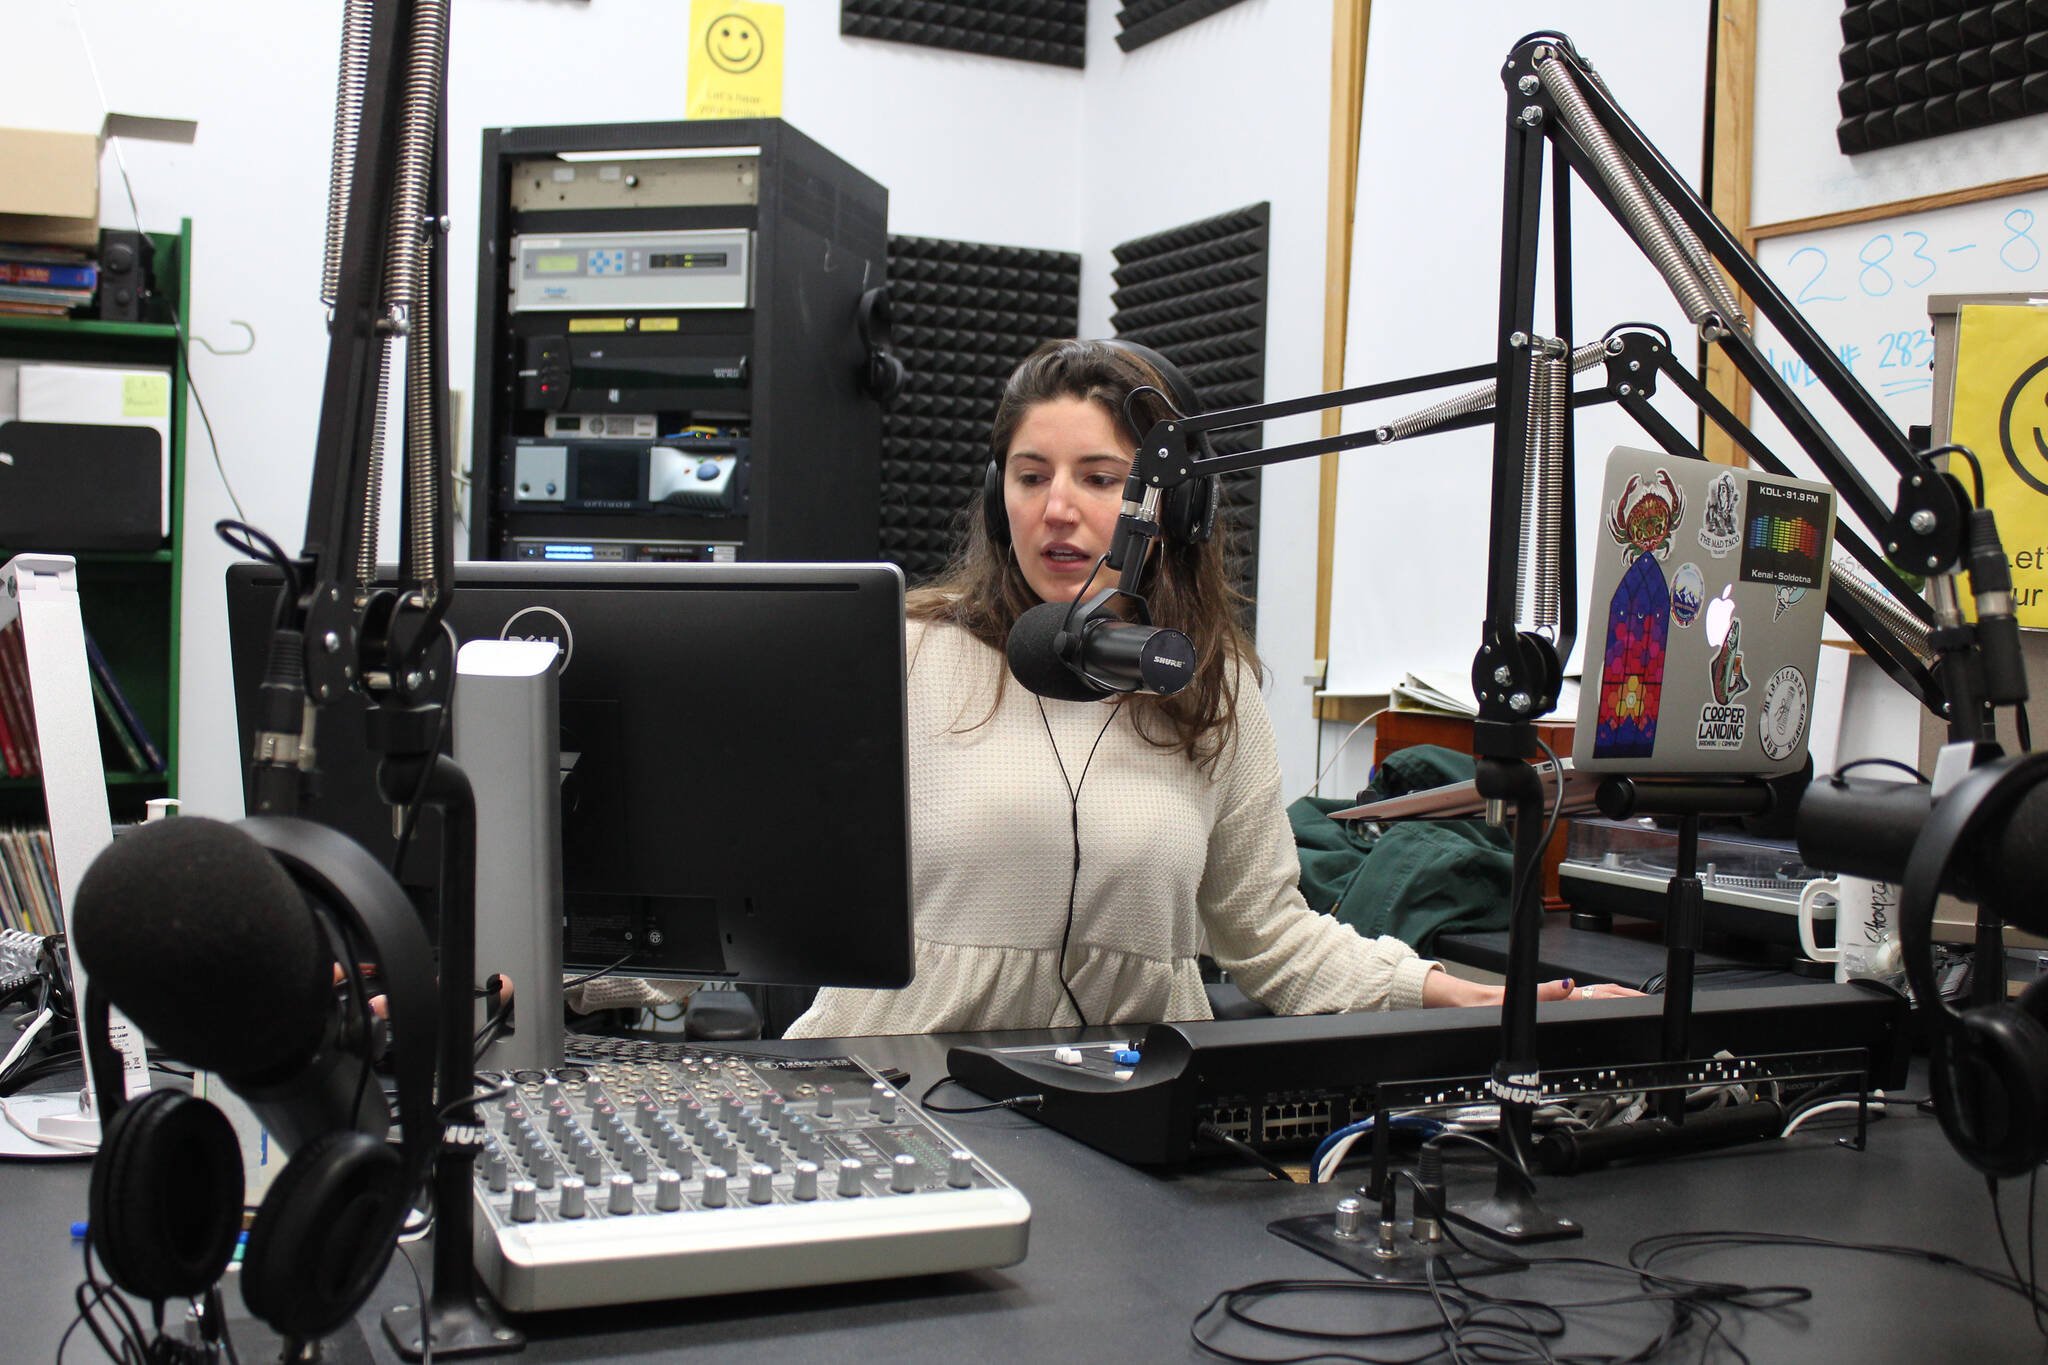 Sabine Poux anchors KDLL’s evening news show on Monday, Dec. 13, 2021 in Kenai, Alaska. KDLL will add a reporter to its staff through the Report for America program. (Ashlyn O’Hara/Peninsula Clarion)